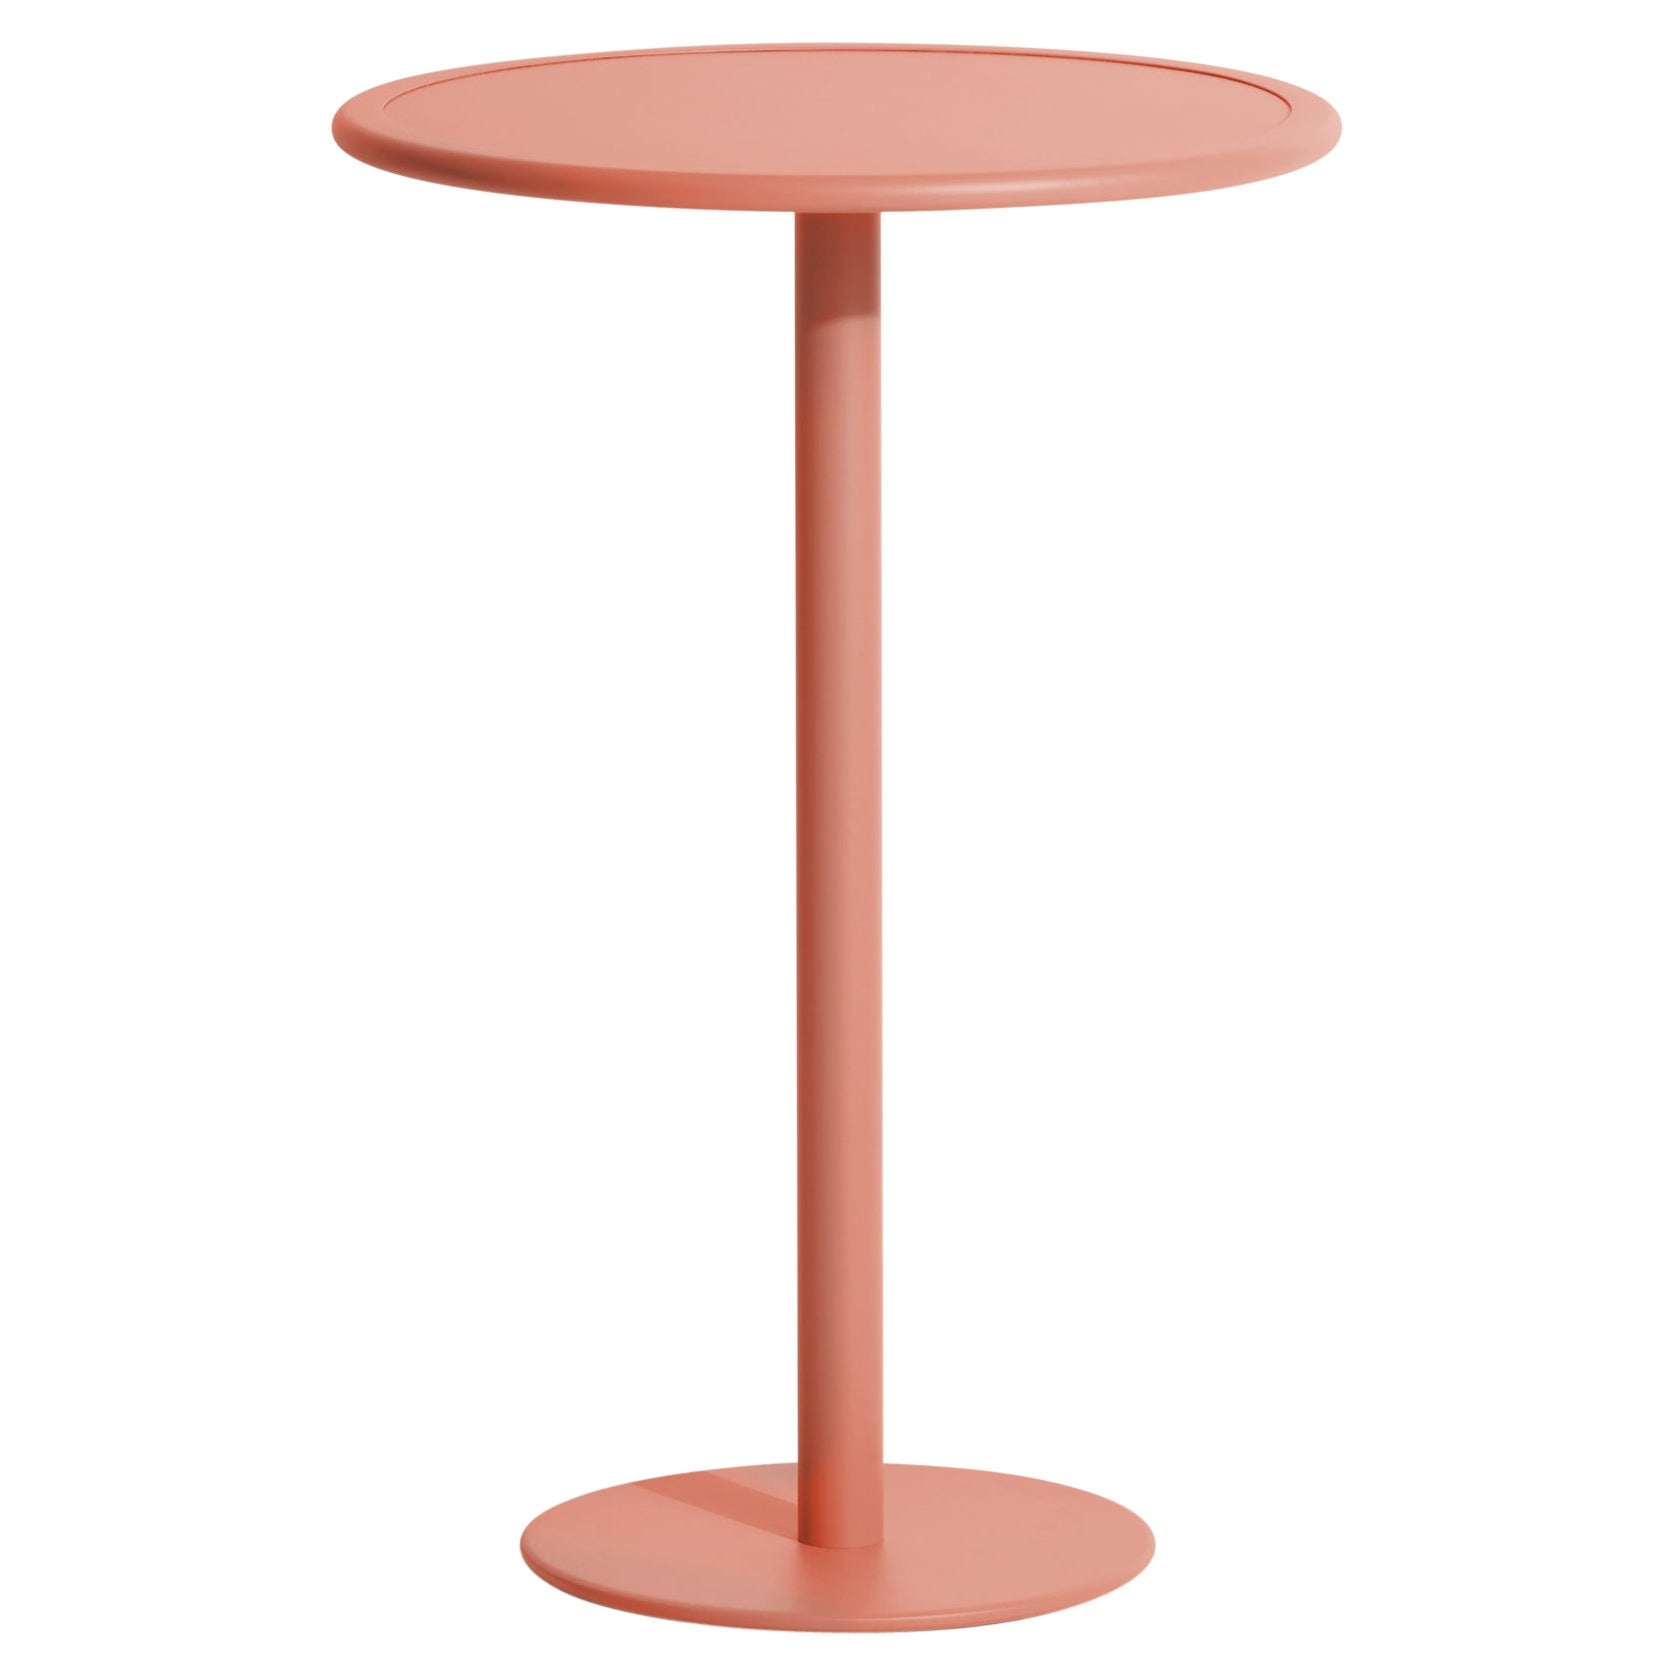 Petite Friture Week-End Round High Table in Coral Aluminium, 2017 For Sale